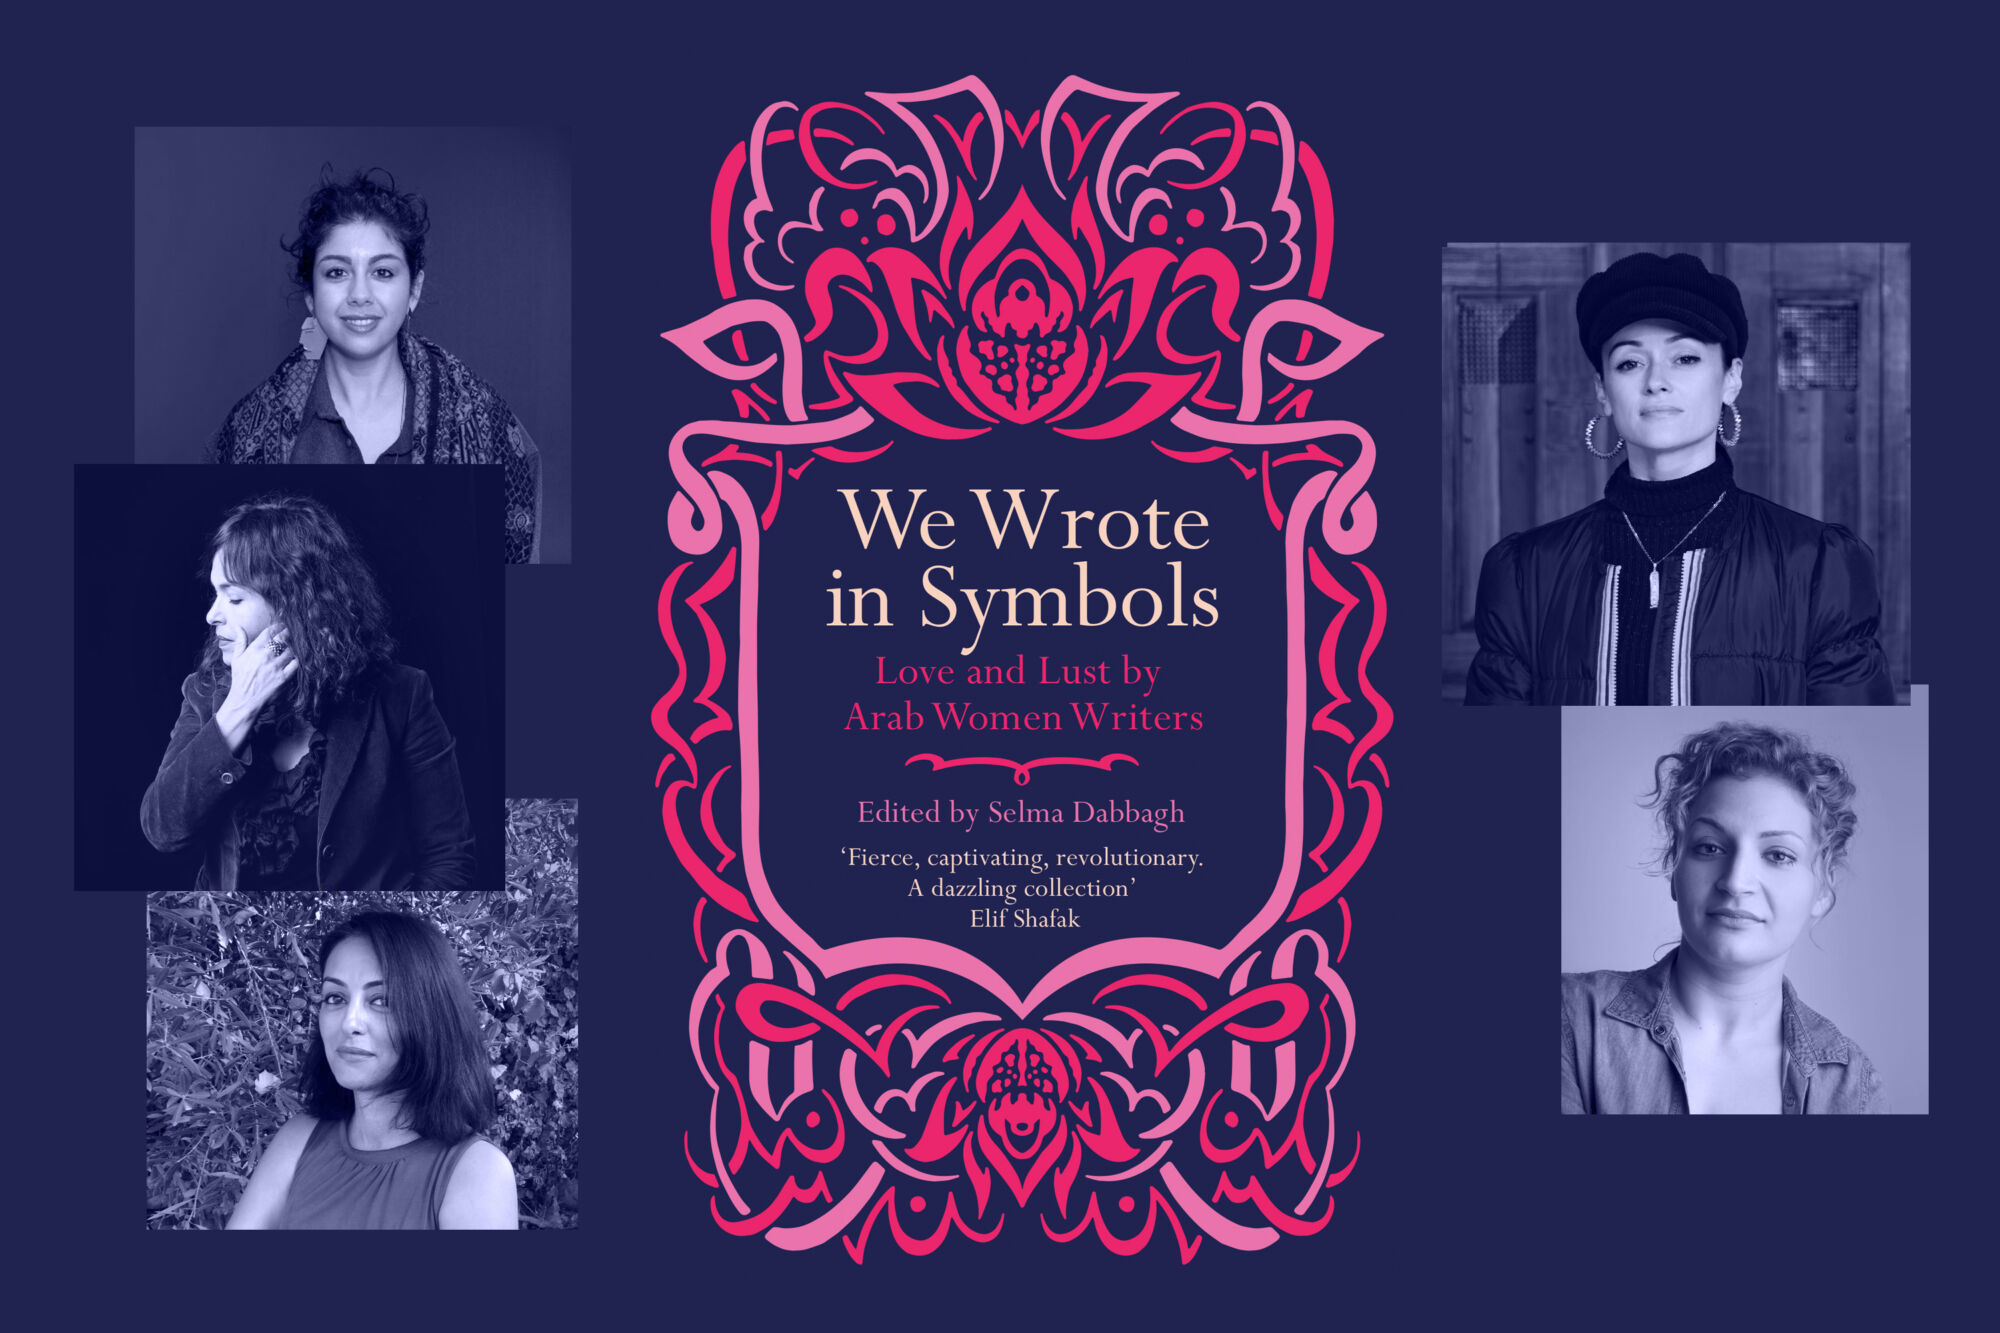 We Wrote in Symbols cover and profiles